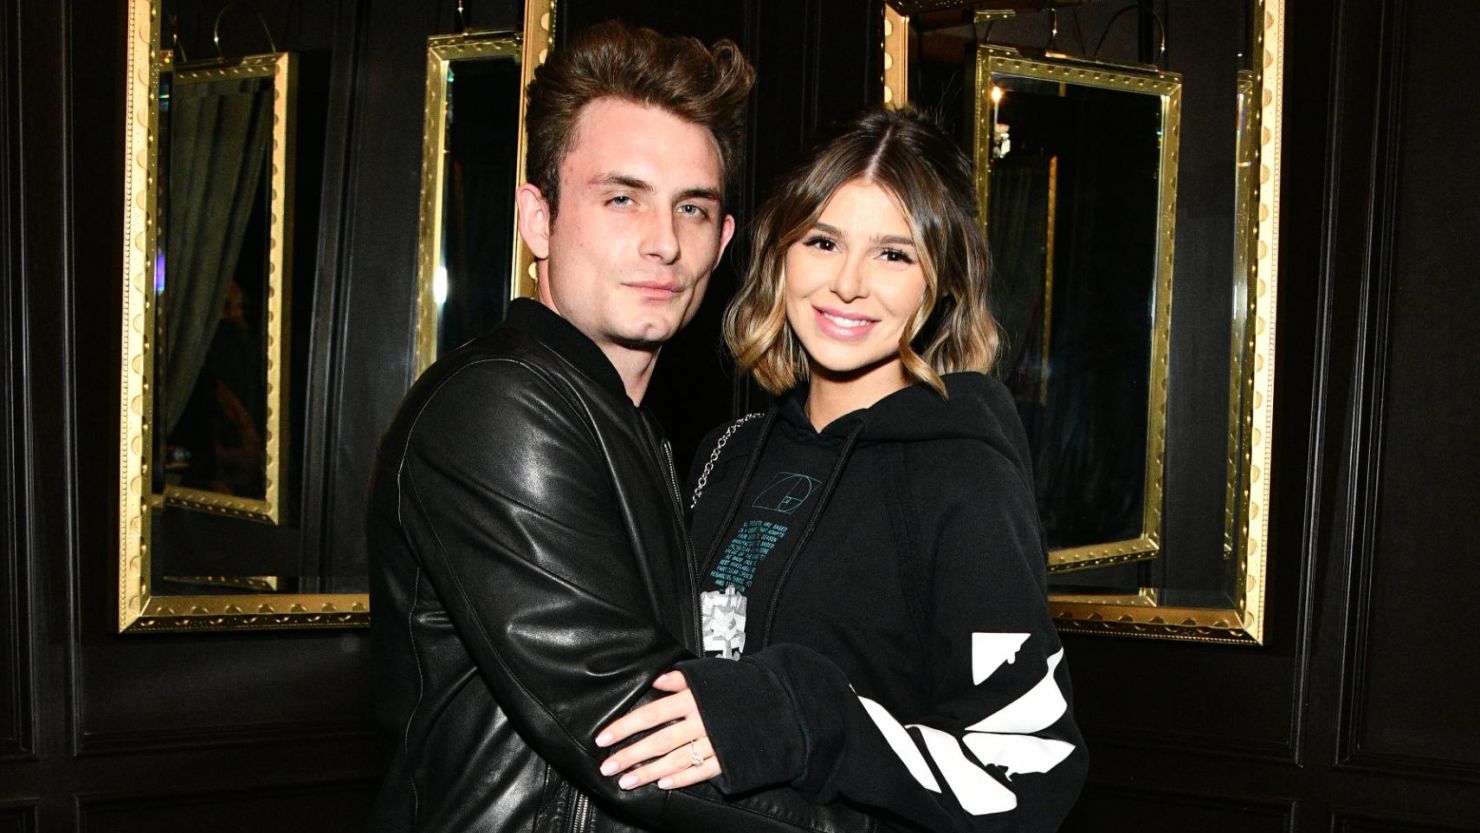 James Kennedy and Raquel Leviss attend the Tom Sandoval & The Most Extras performance at Hotel Cafe on November 14, 2021 in Los Angeles, California. 